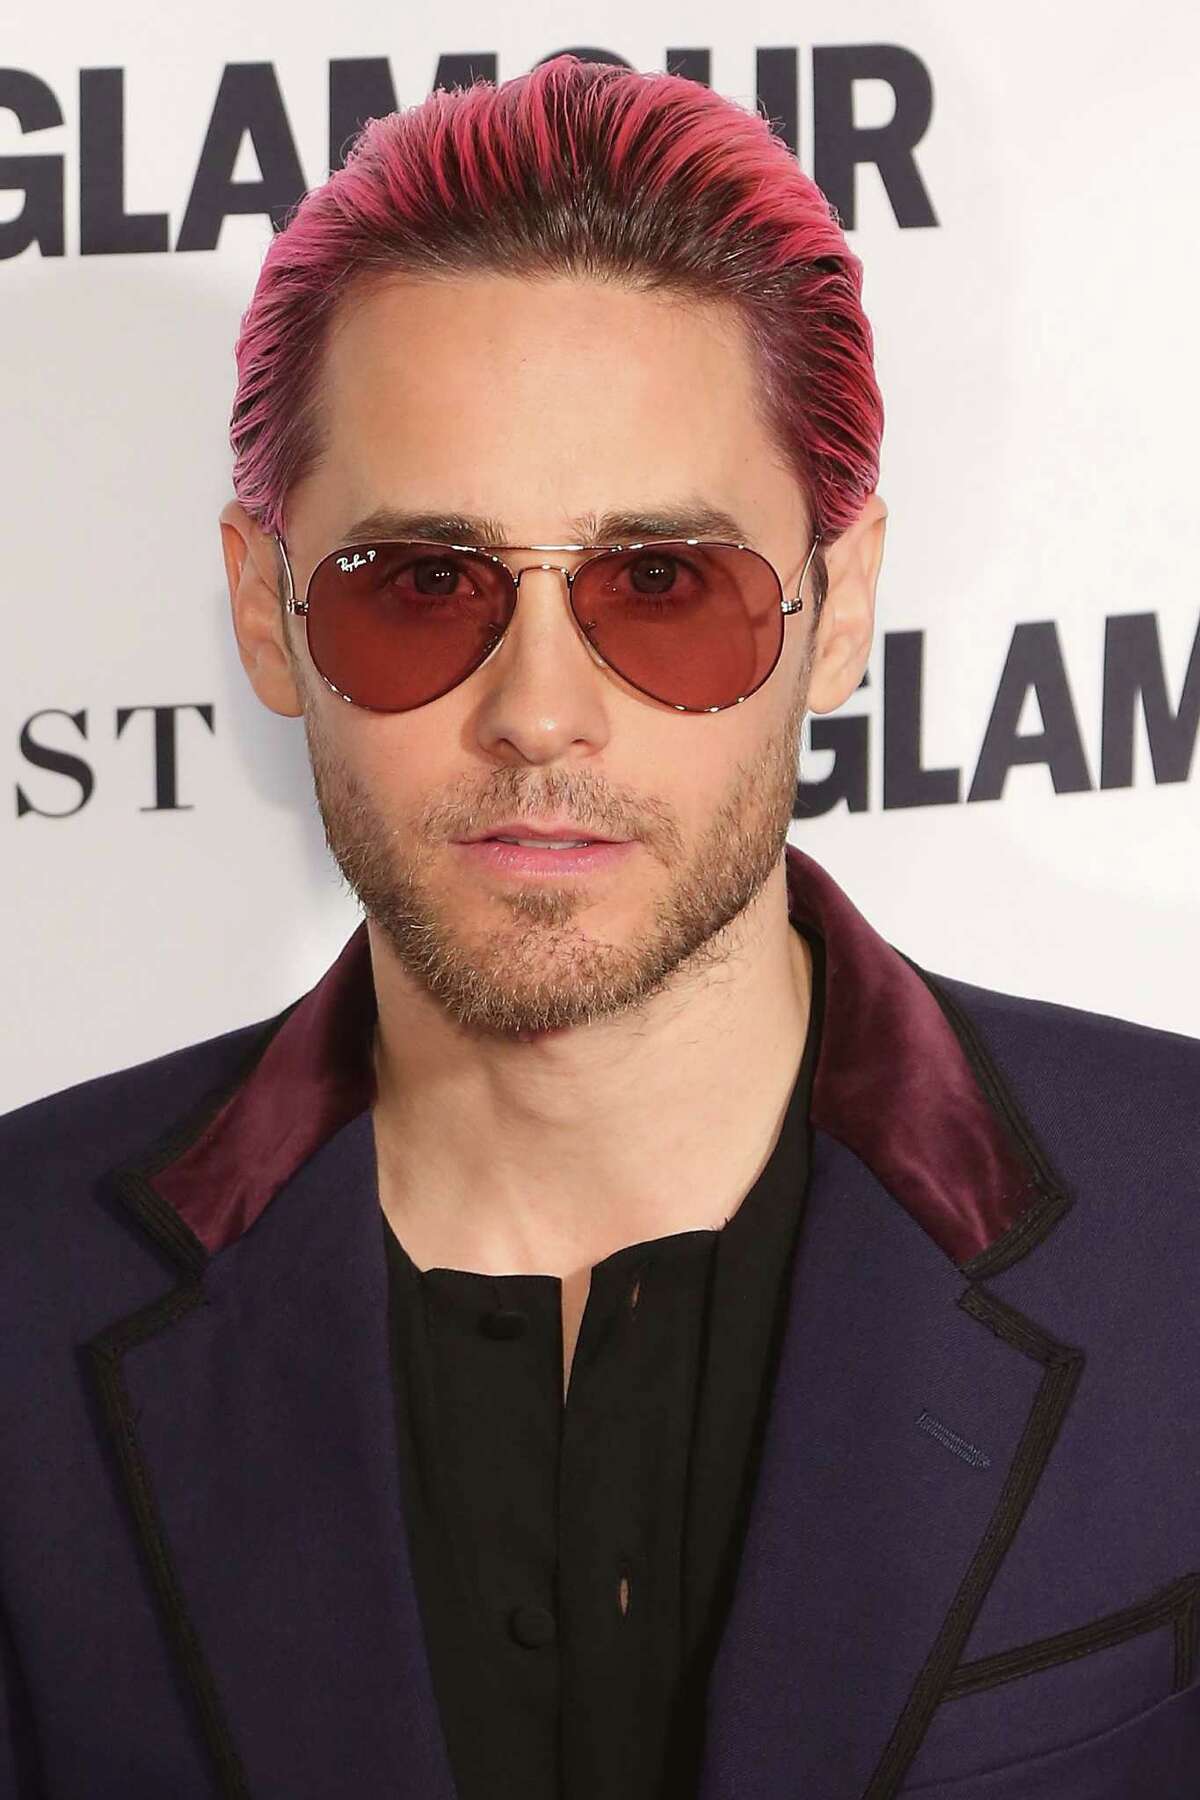 Actor Jared Leto was born in Bossier City, a town in northwestern Louisiana, on Dec. 26, 1971.